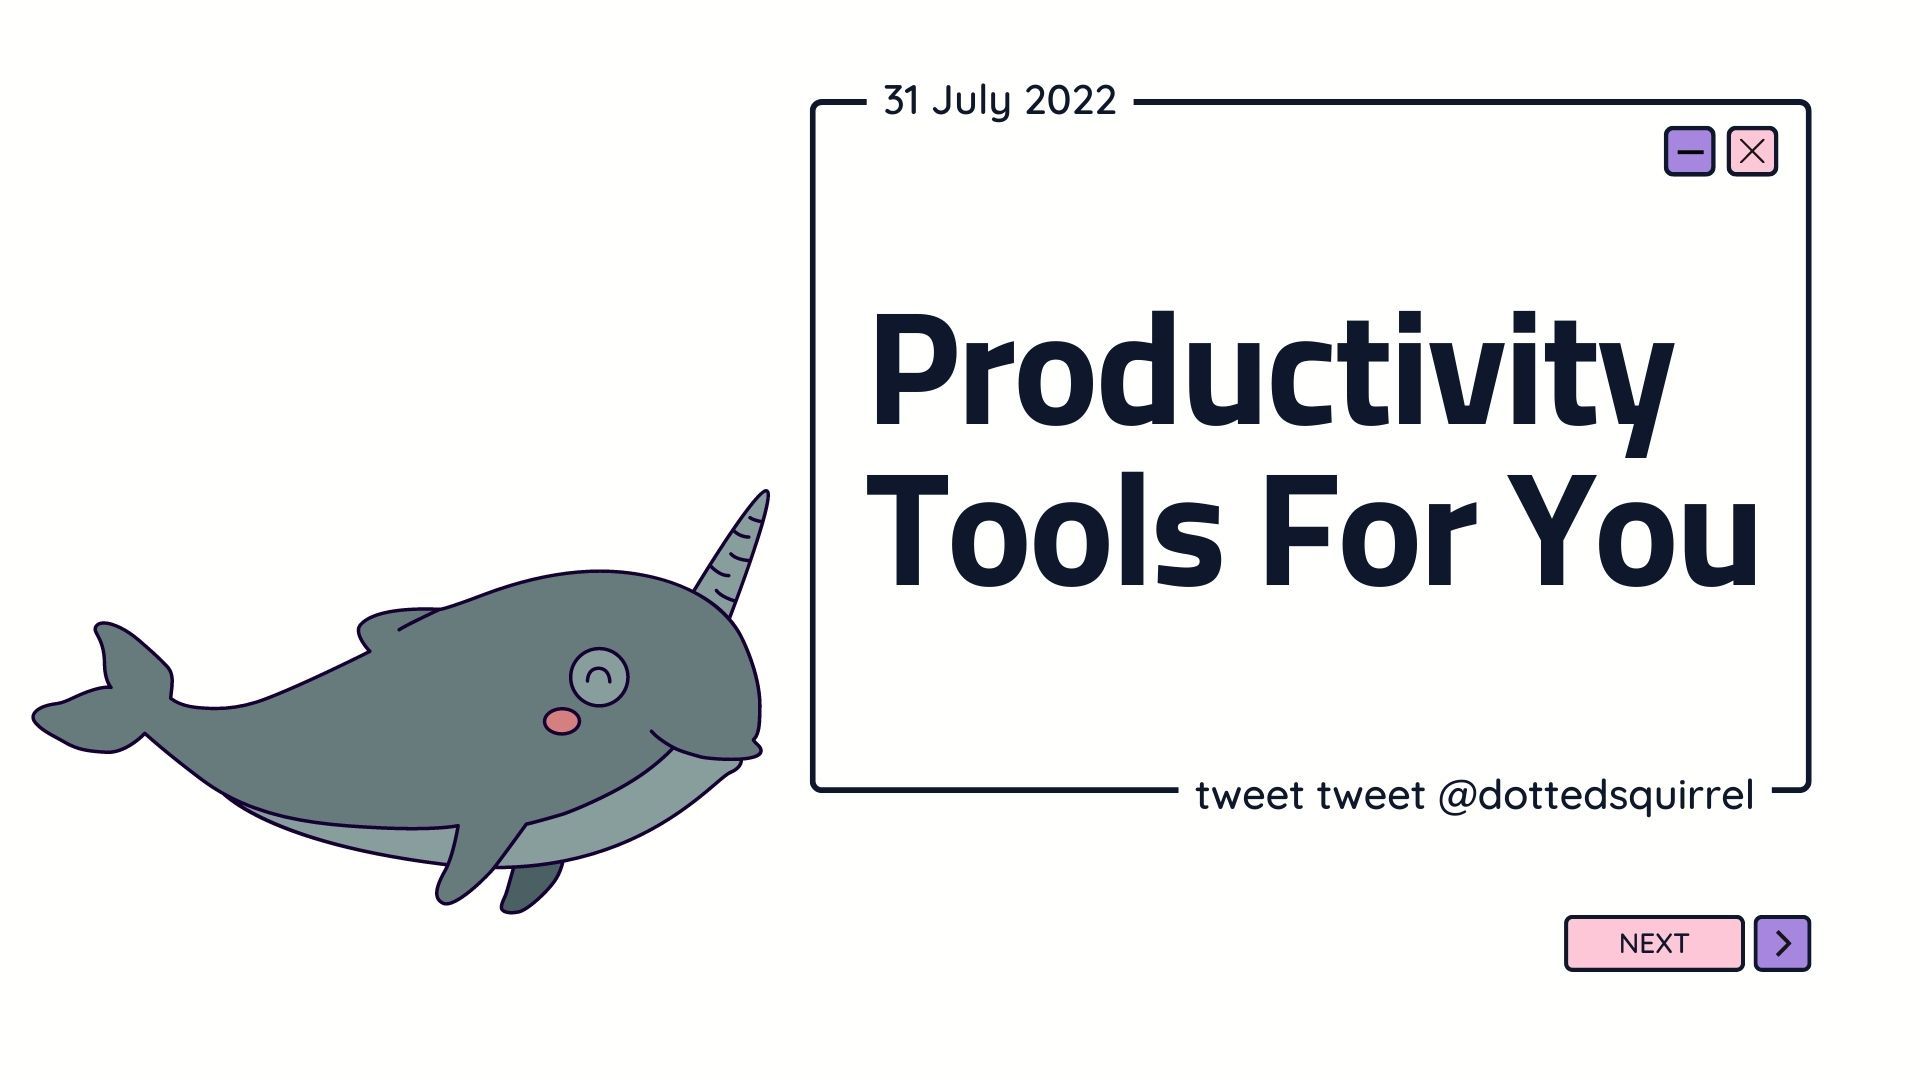 Productivity is in the tools you use